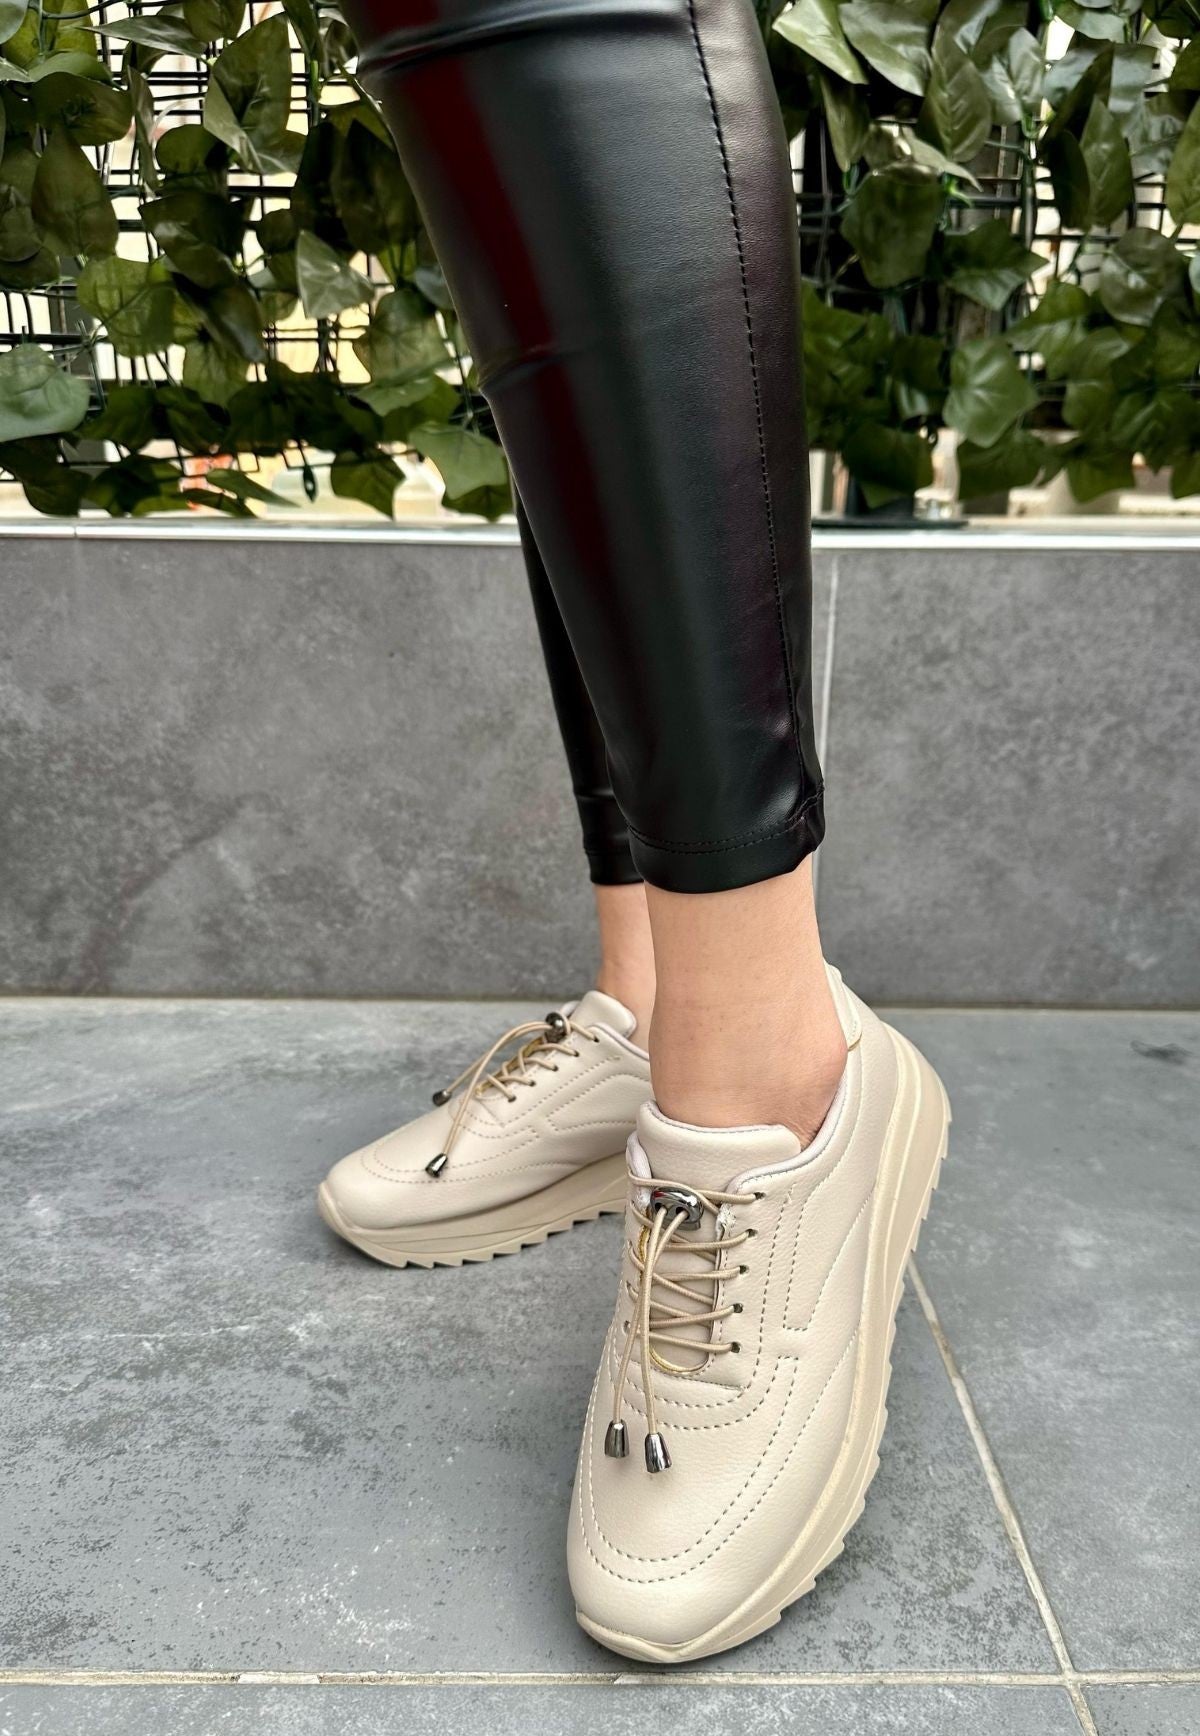 Women's Beige Leather Lace-Up Sneakers Shoes - STREETMODE™